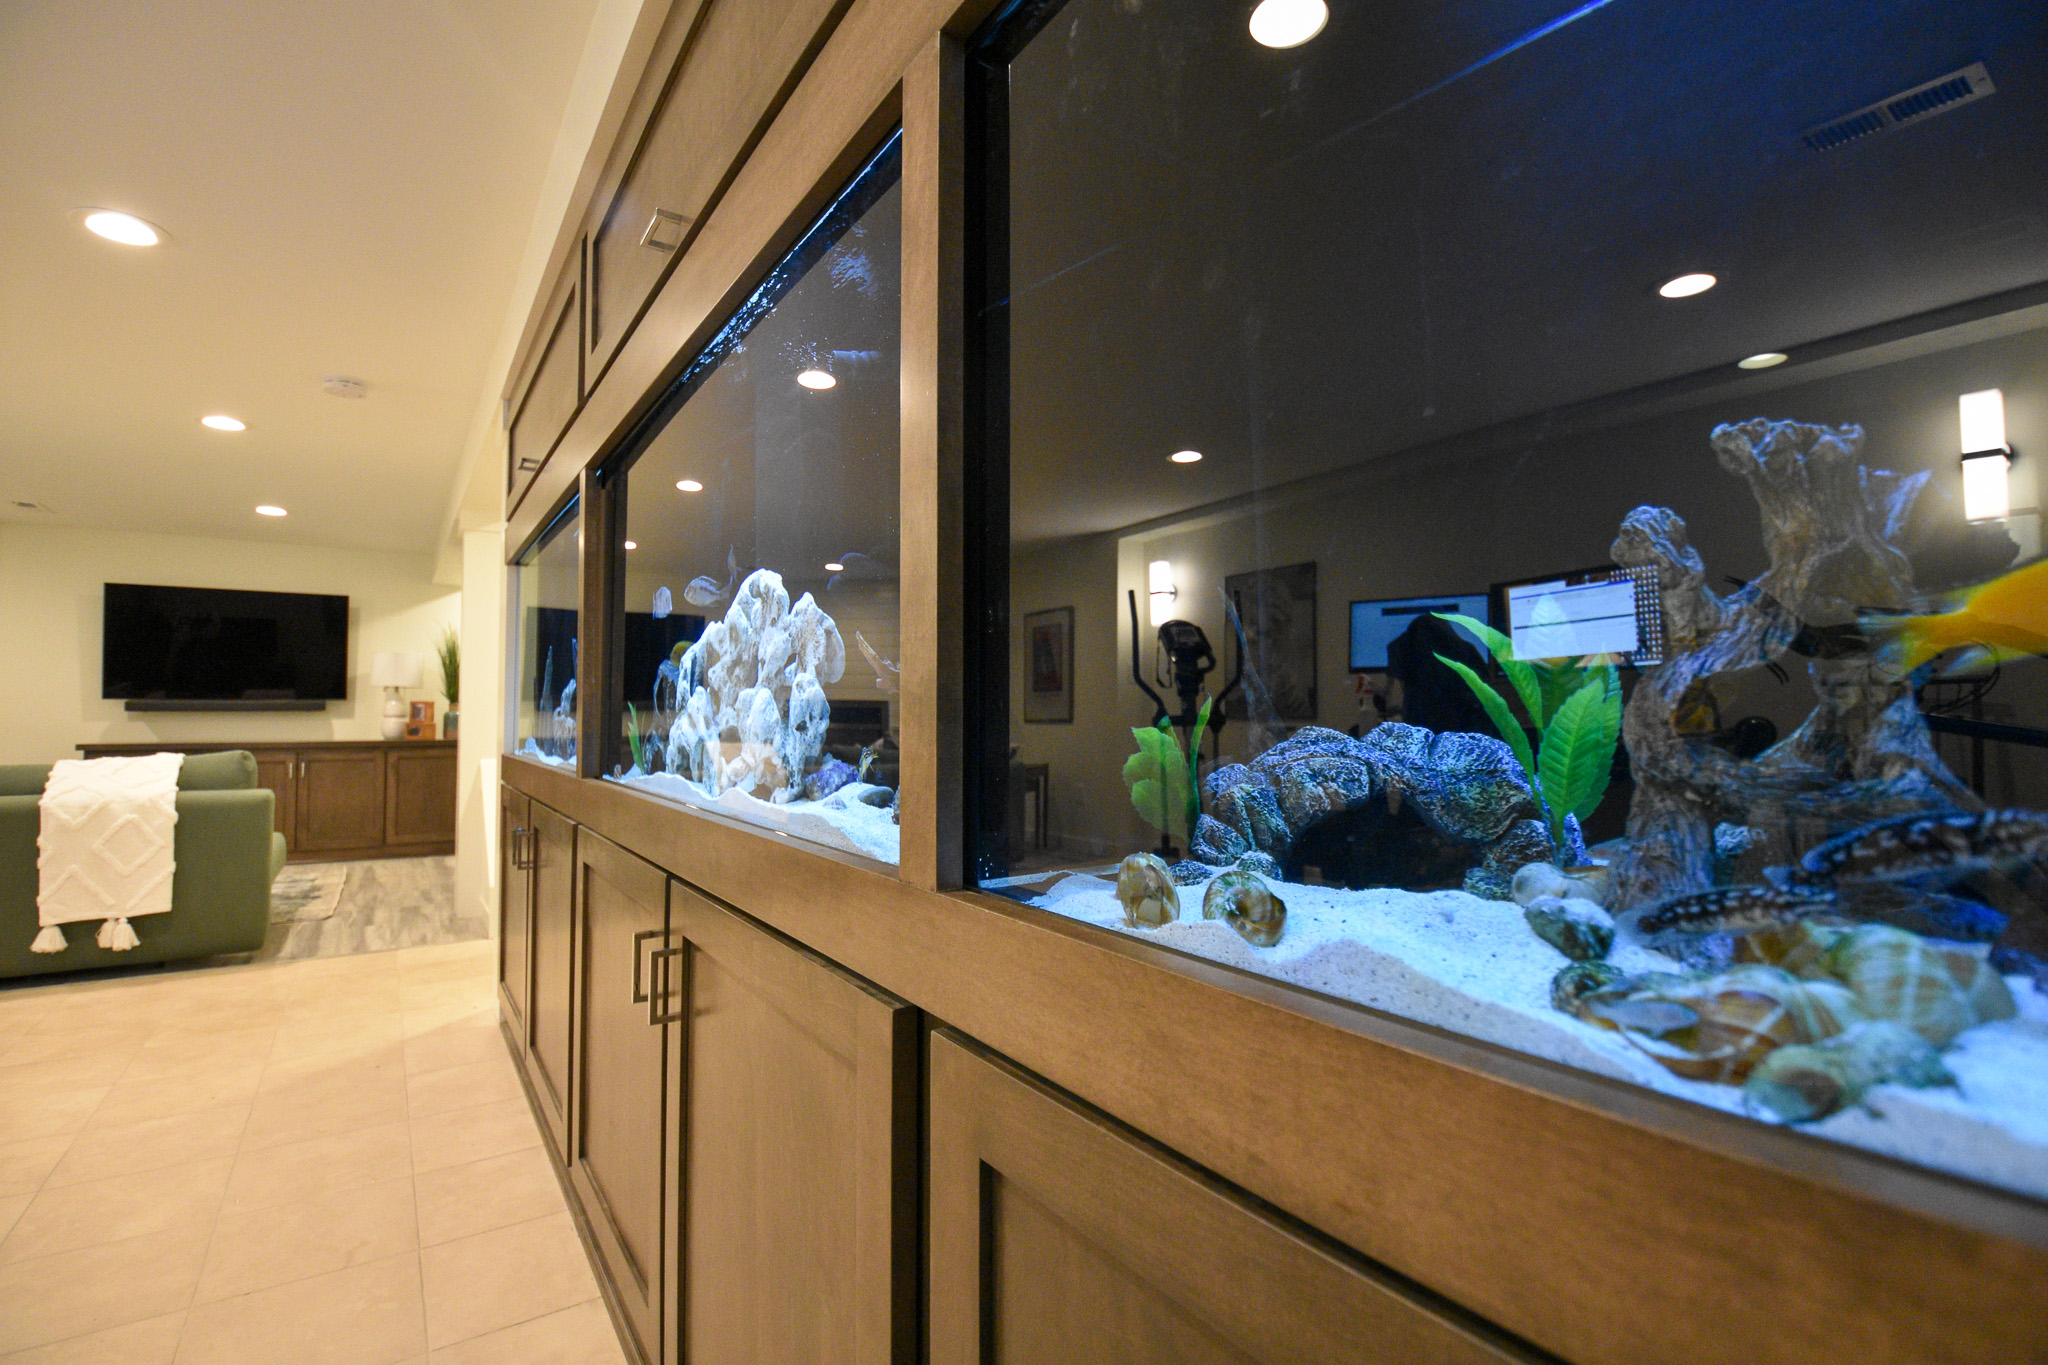 Fishtank build into cabinetry in basement remodel